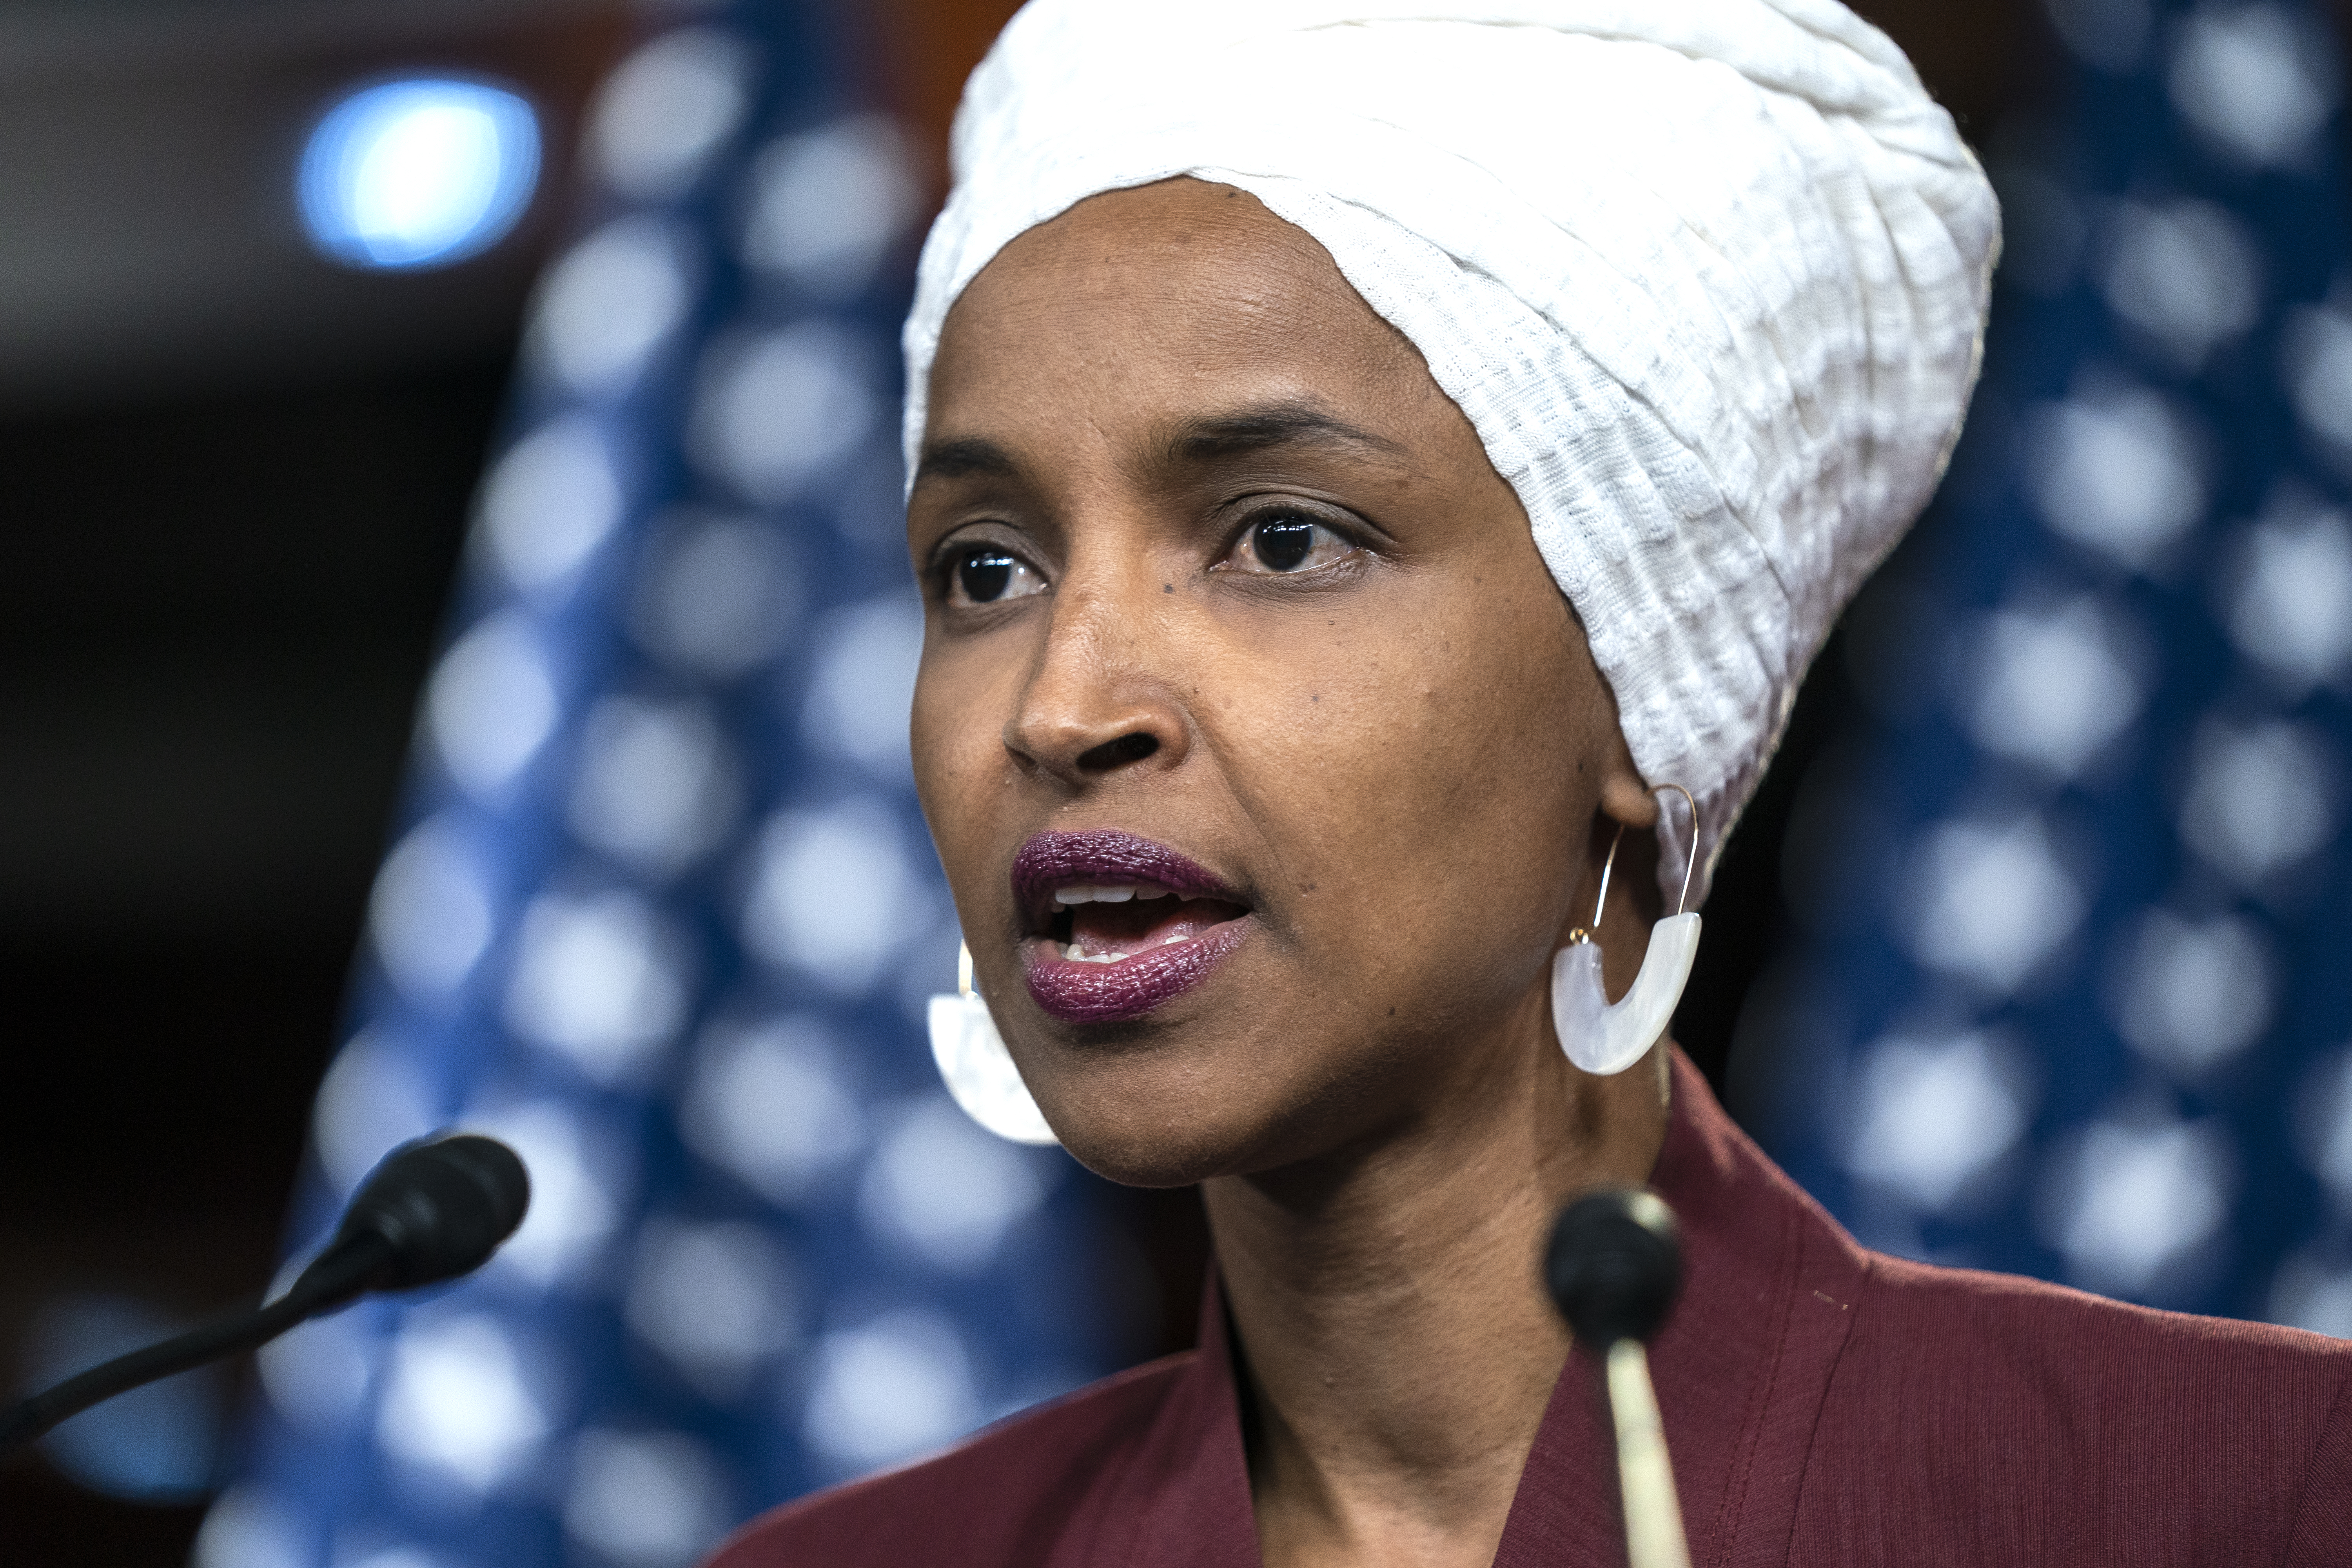 Democratic Representative Ilhan Omar speaks about President Trump's Twitter attacks against her in the US Capitol in Washington, DC, USA, 15 July 2019. EPA